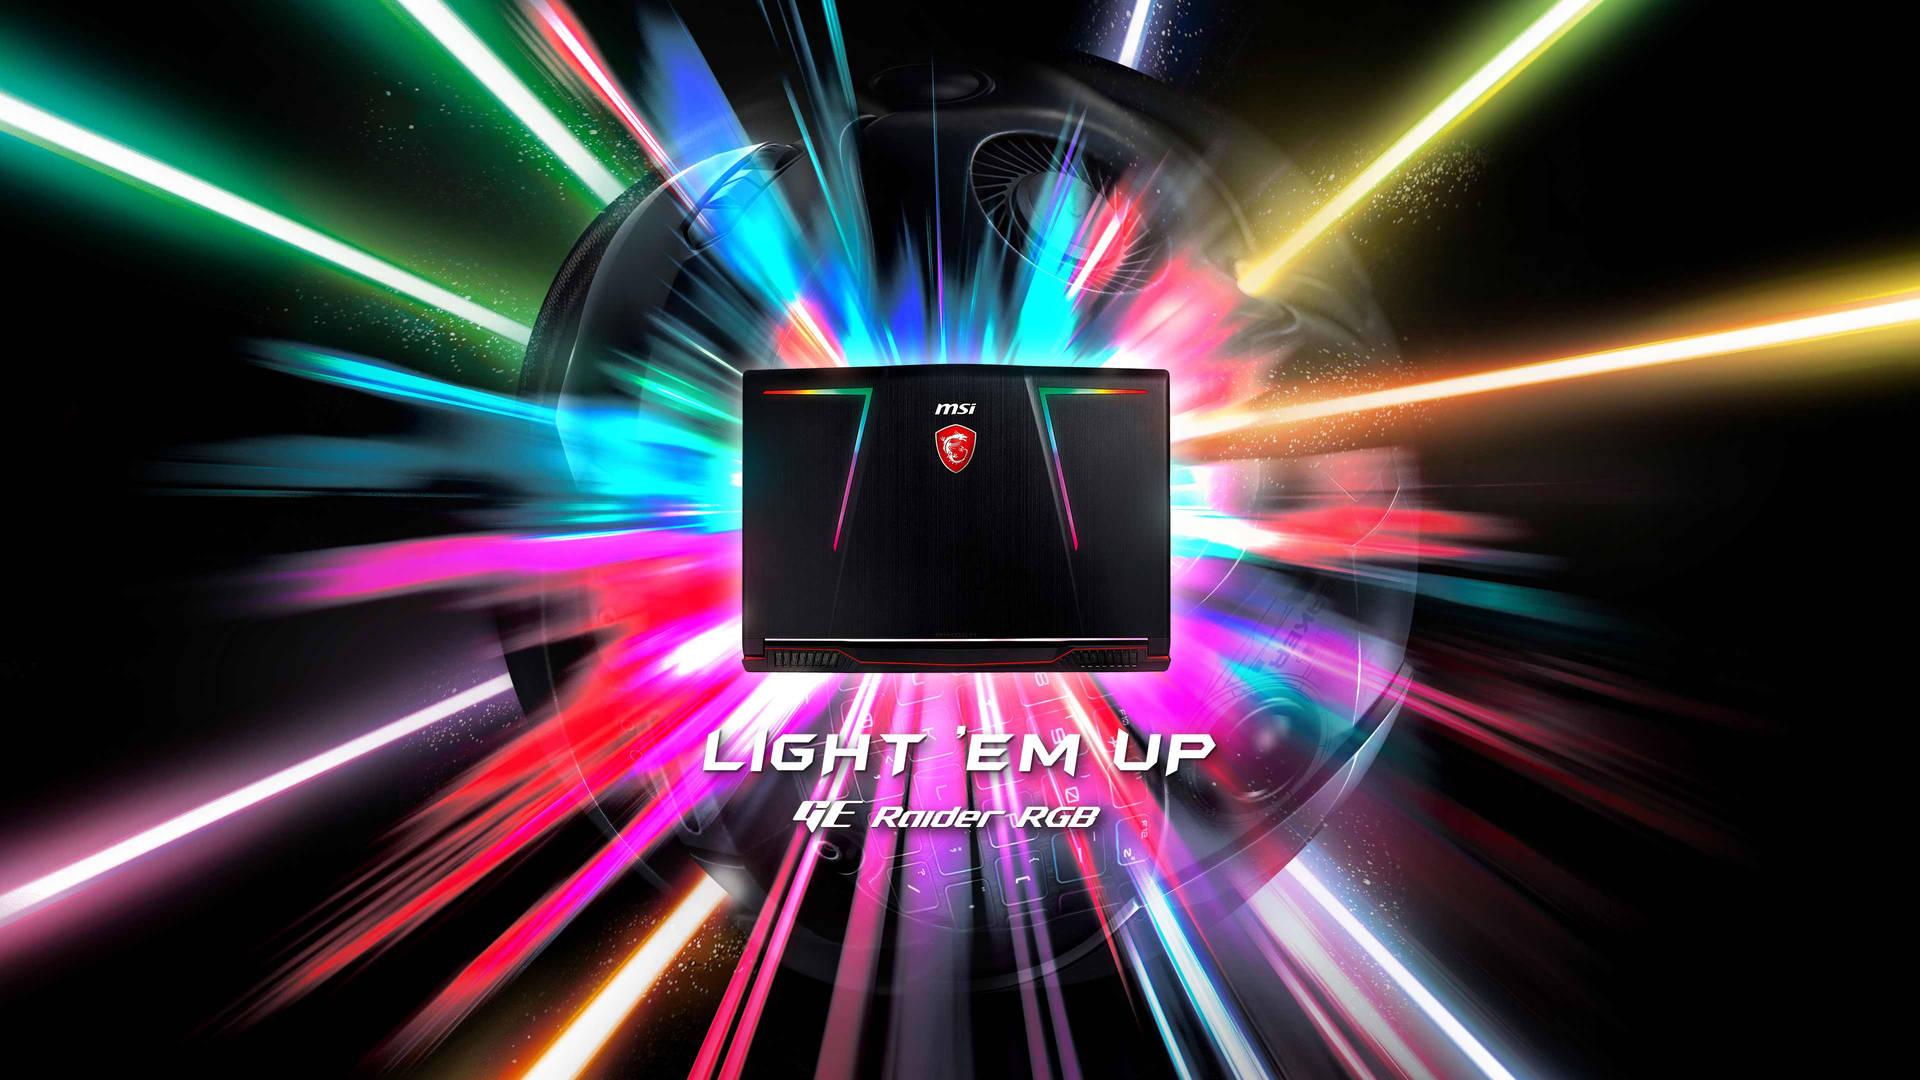 MSI Laptop with RGB Backlight Wallpaper